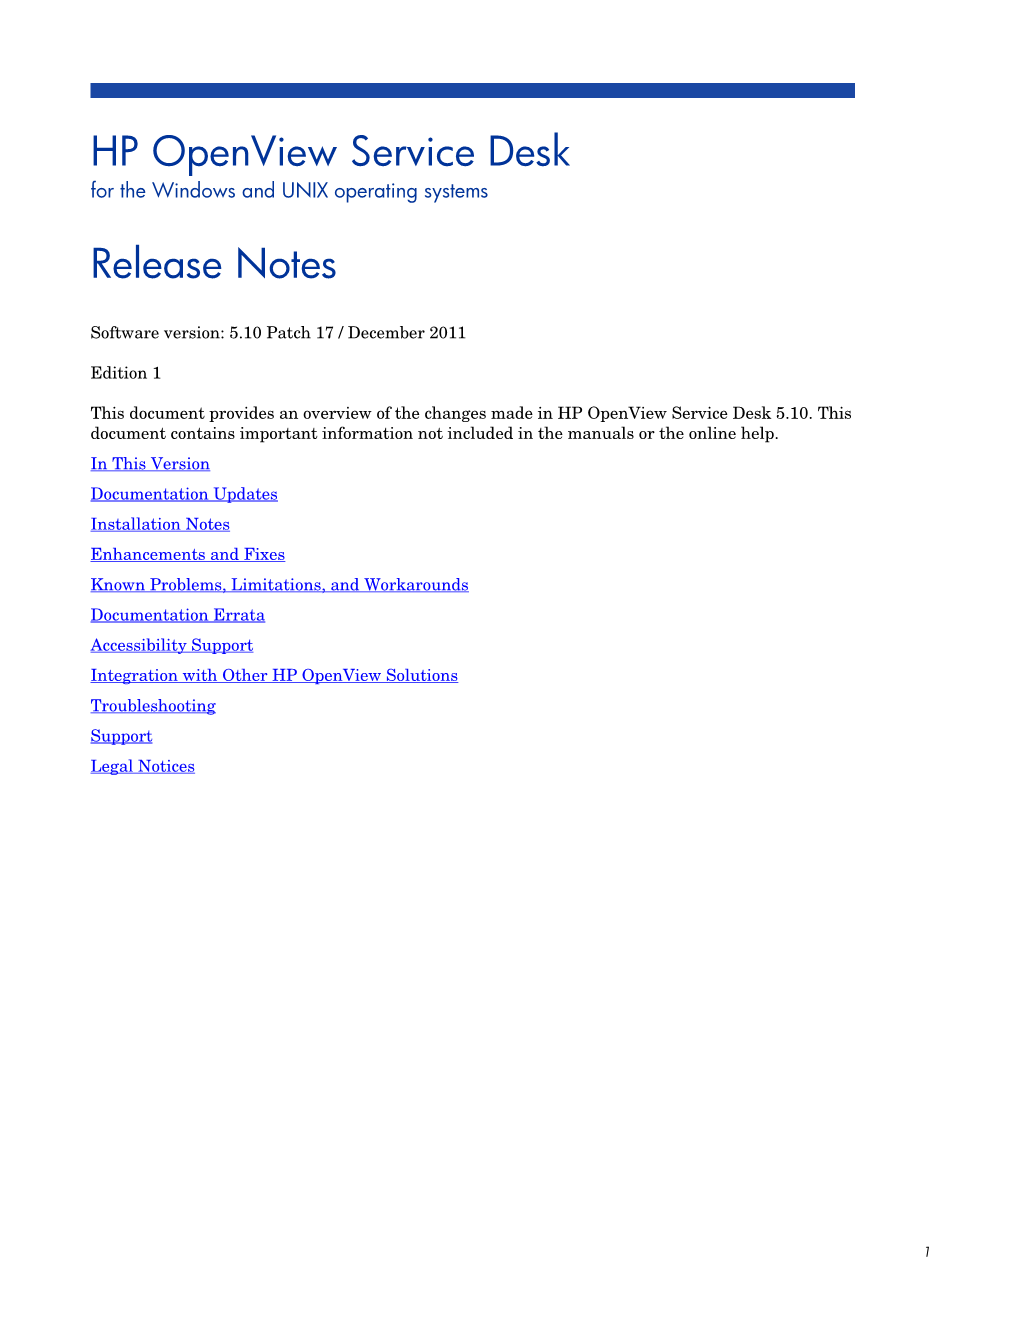 HP Openview Service Desk 5.10 Patch 17 Release Notes